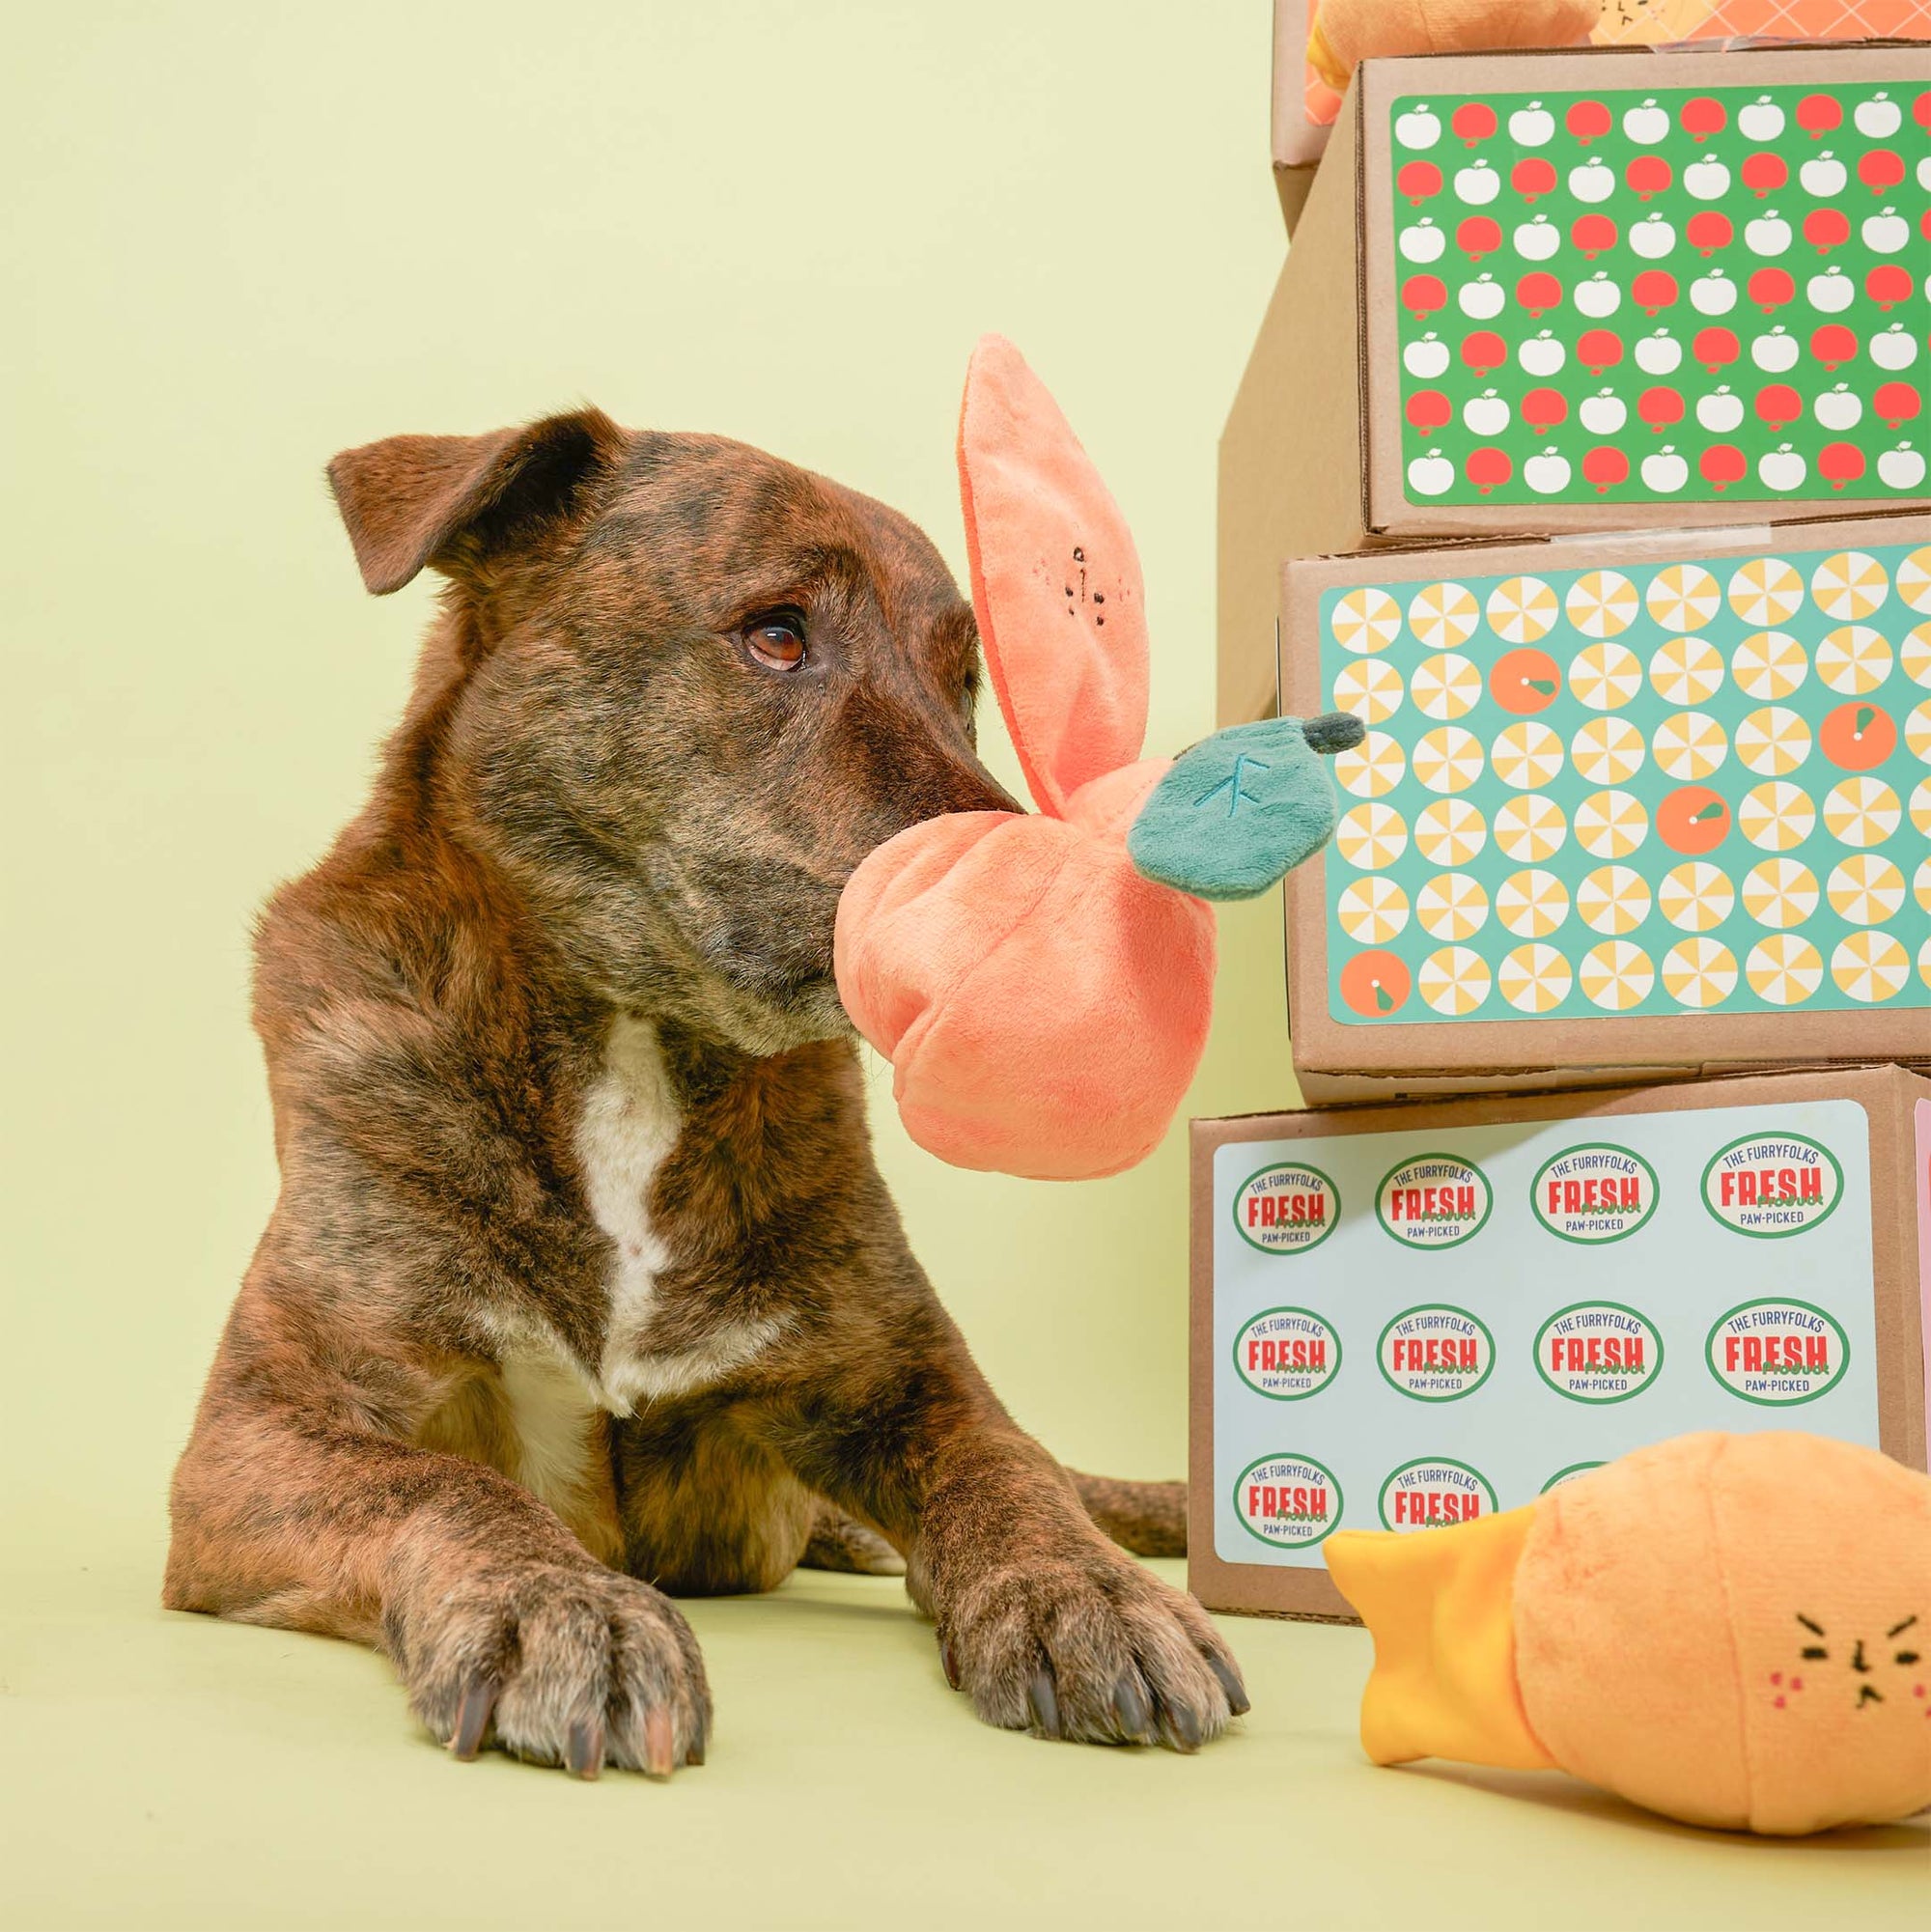 A brown dog gently holds an orange-shaped dog toy in its mouth, with a look of concentration, surrounded by boxes labeled "Fresh" by The Furryfolks, against a greenish-yellow background.